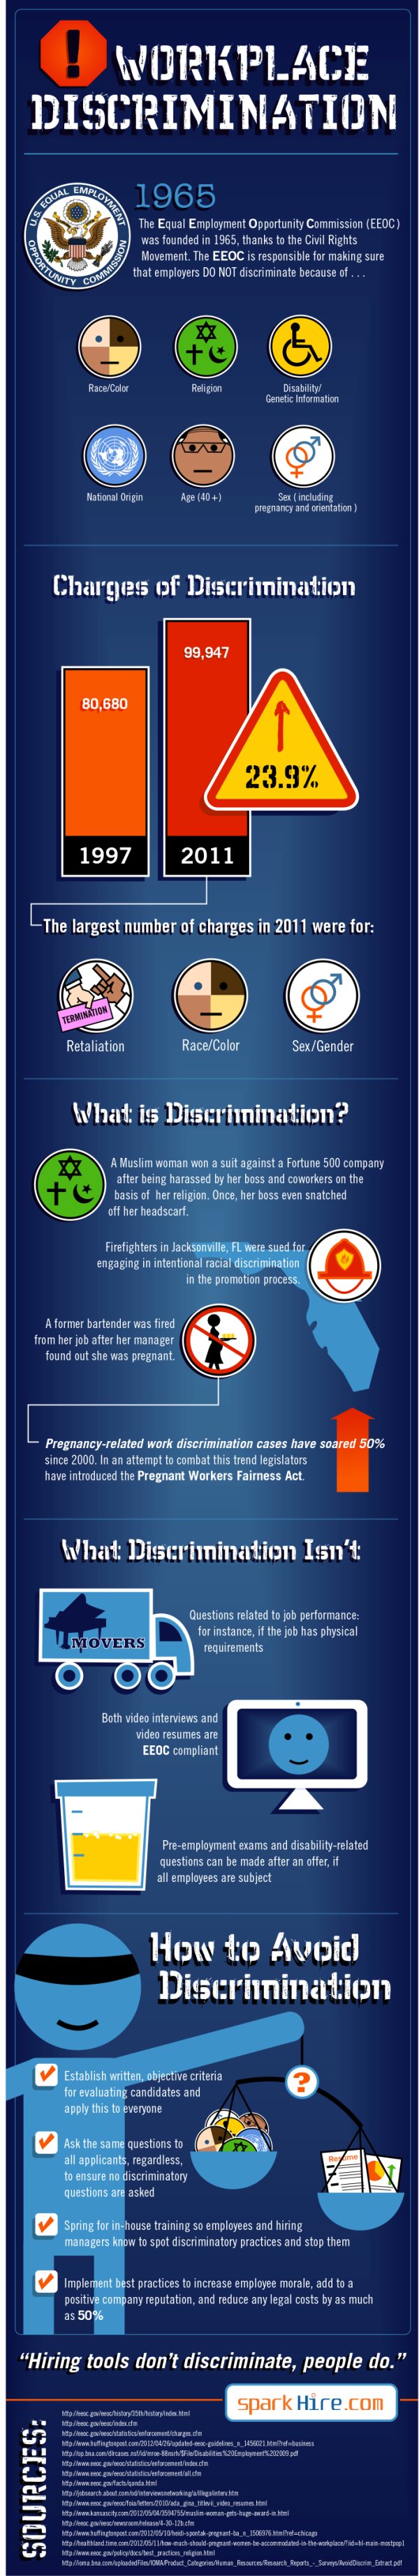 How To Avoid Workplace and Hiring Discrimination